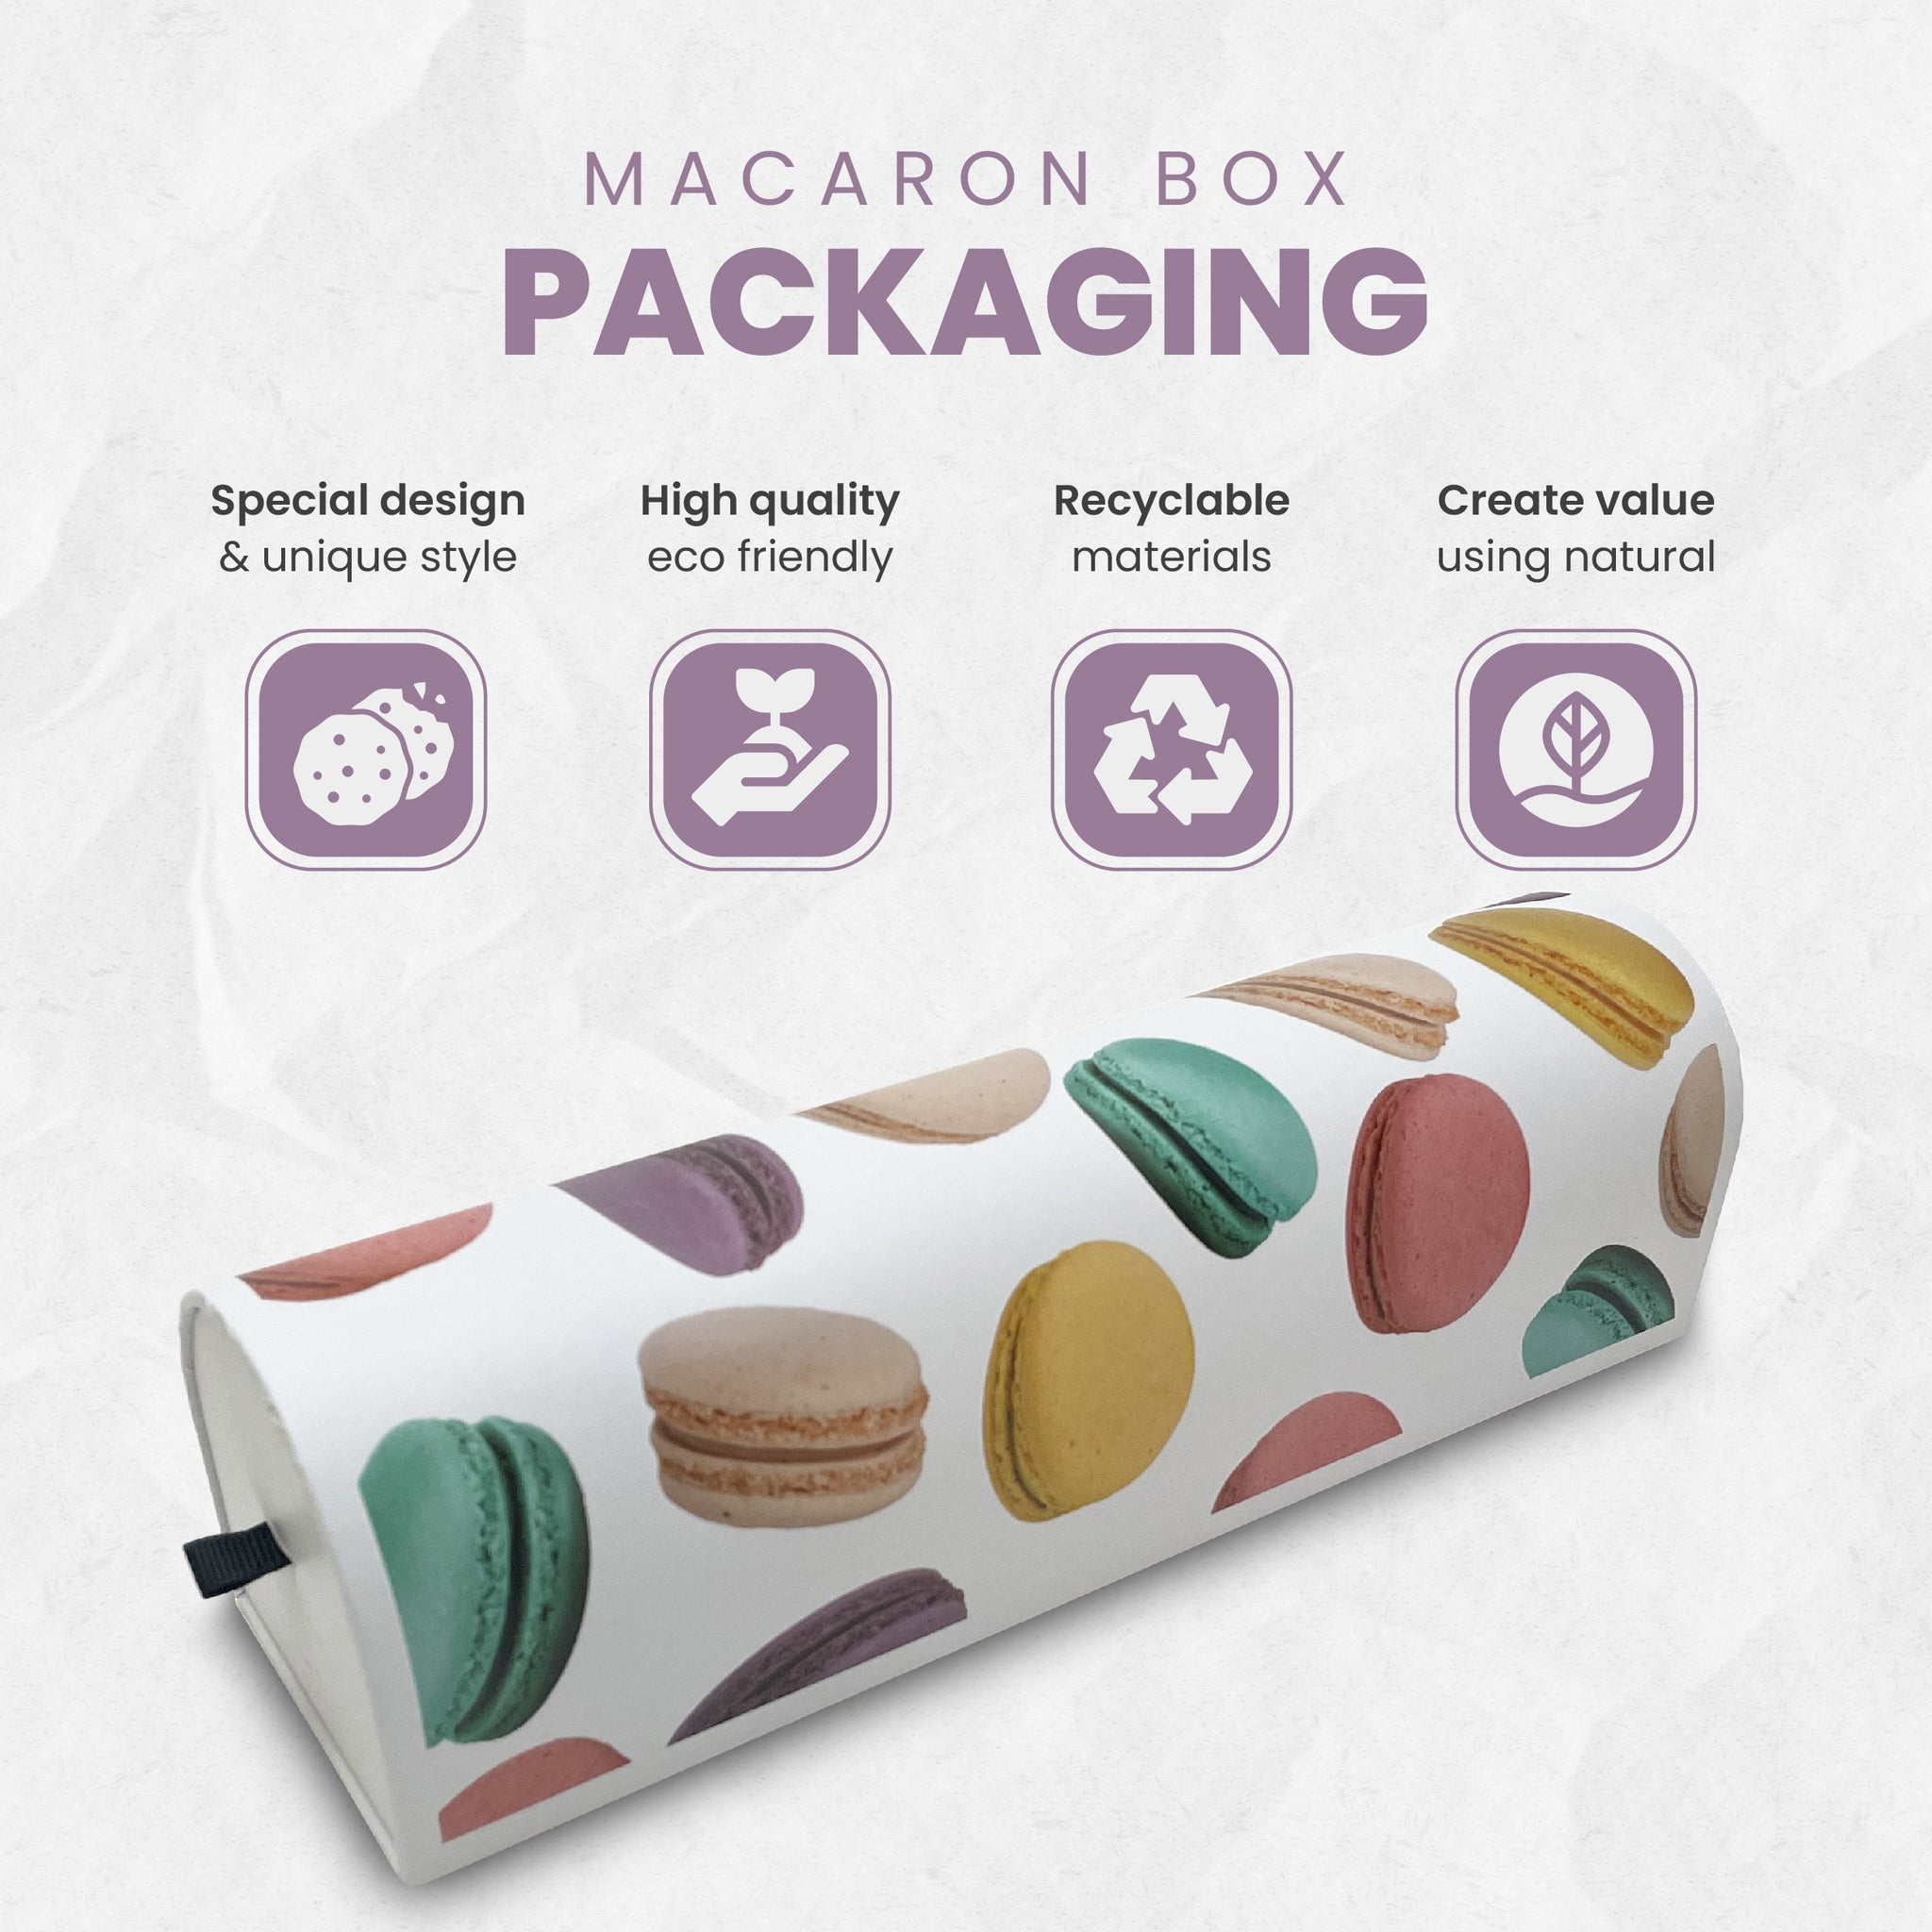 Luxury Macaron Box for Special Events with a Print, Holds 7 Macarons